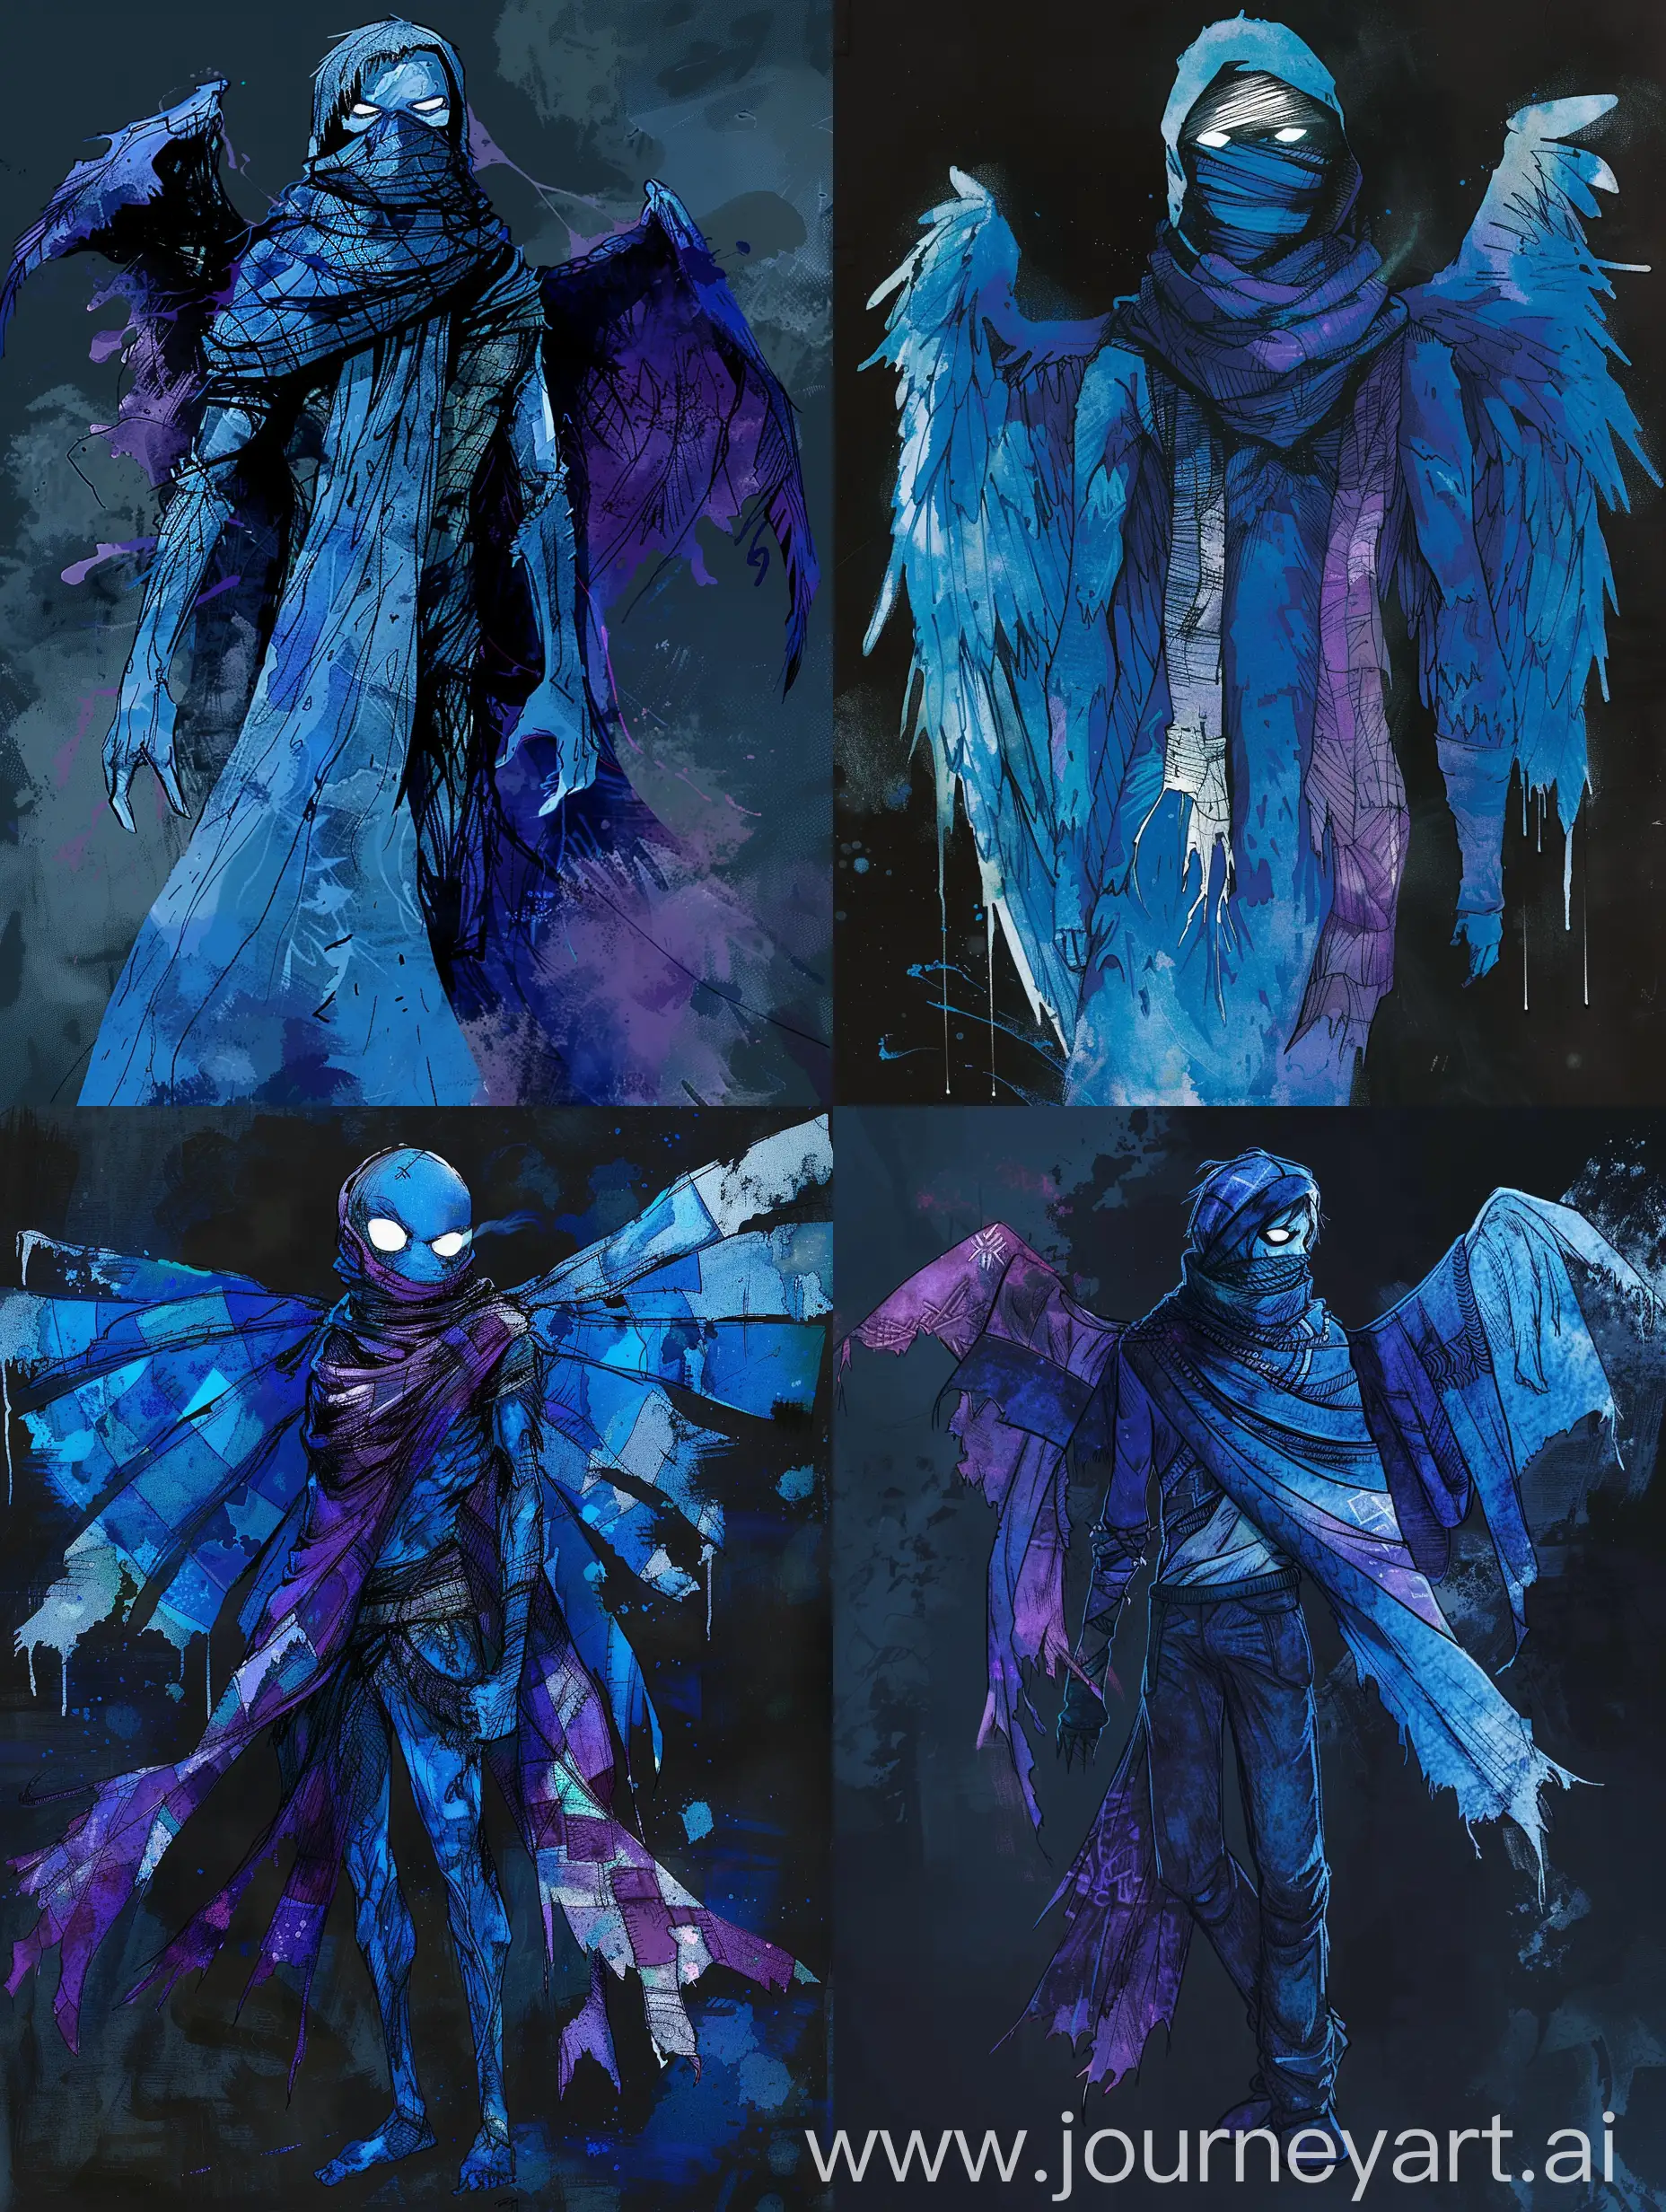 Raziel, Legacy of Kain , full-length skinny body, scarf covers mouth, bright white eyes, ragged patchwork wings, blue character, horror style, ink drawing in blue and purple shades, dark background, smudges